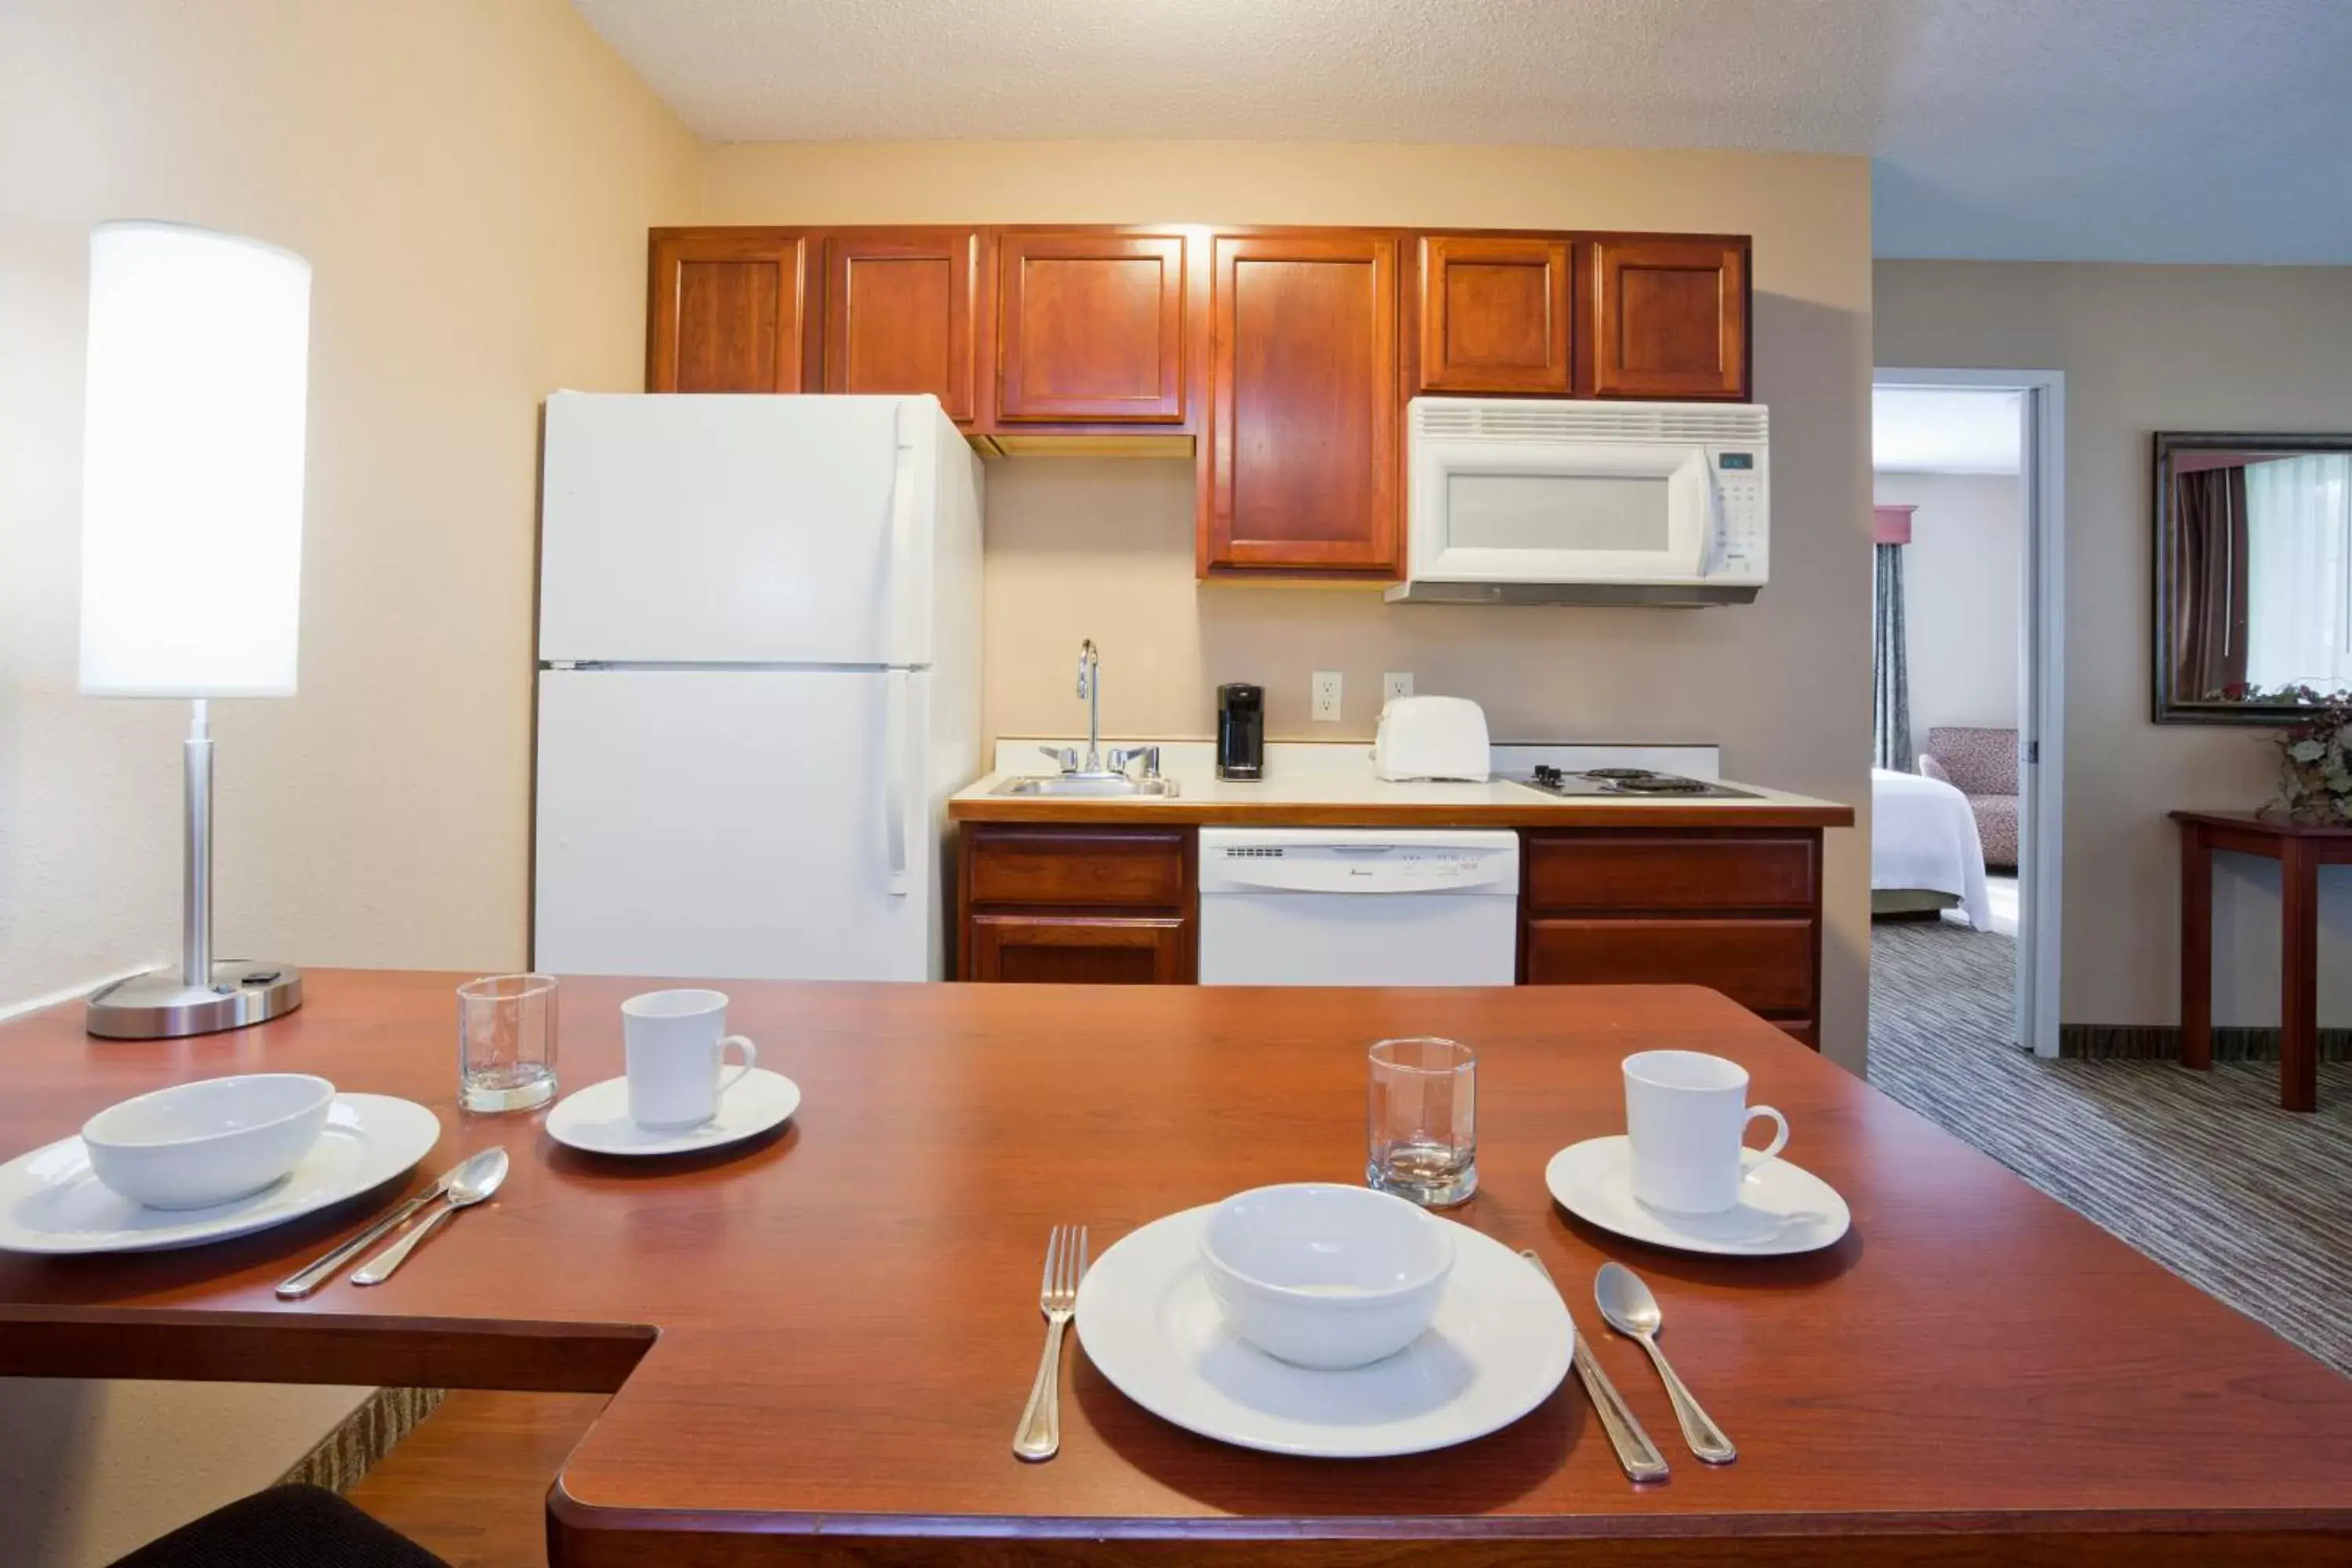 Kitchen/Kitchenette in GrandStay Residential Suites Hotel - Eau Claire